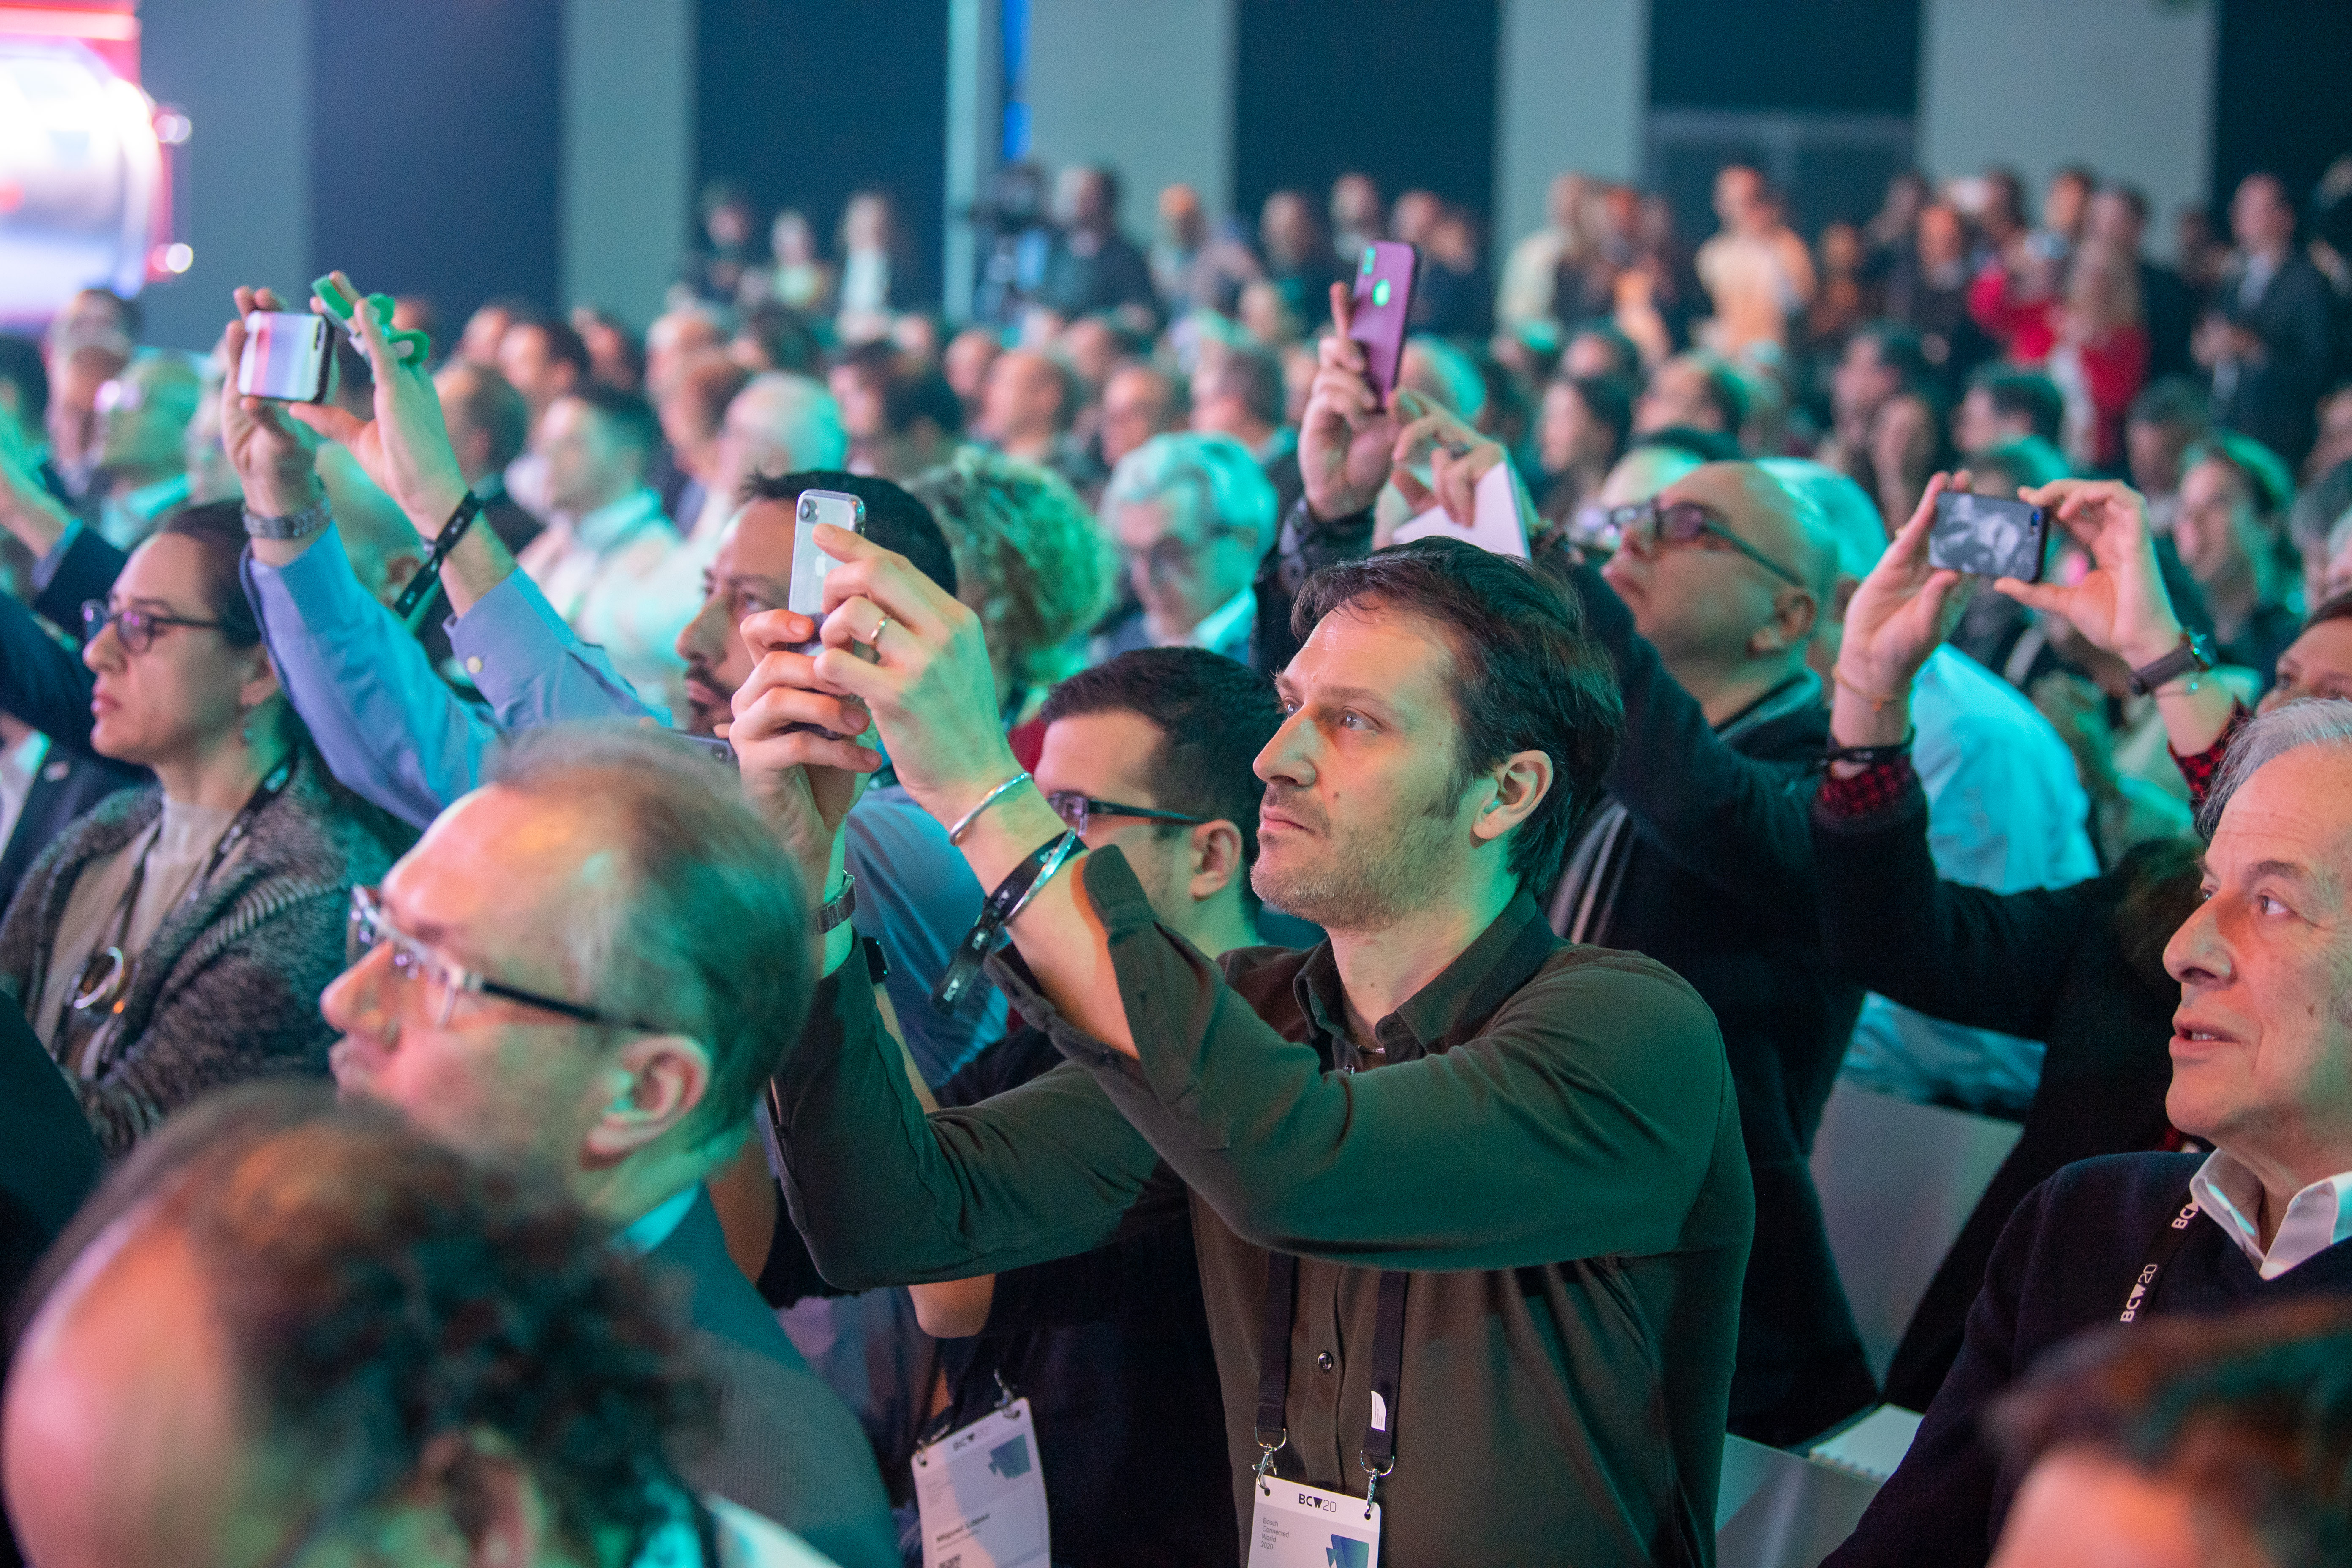 Bosch ConnectedWorld 2020 brings together more than 3500 attendees. This year marks the seventh time BCW has taken place. It is one of the world’s largest international conferences devoted to the internet of things.